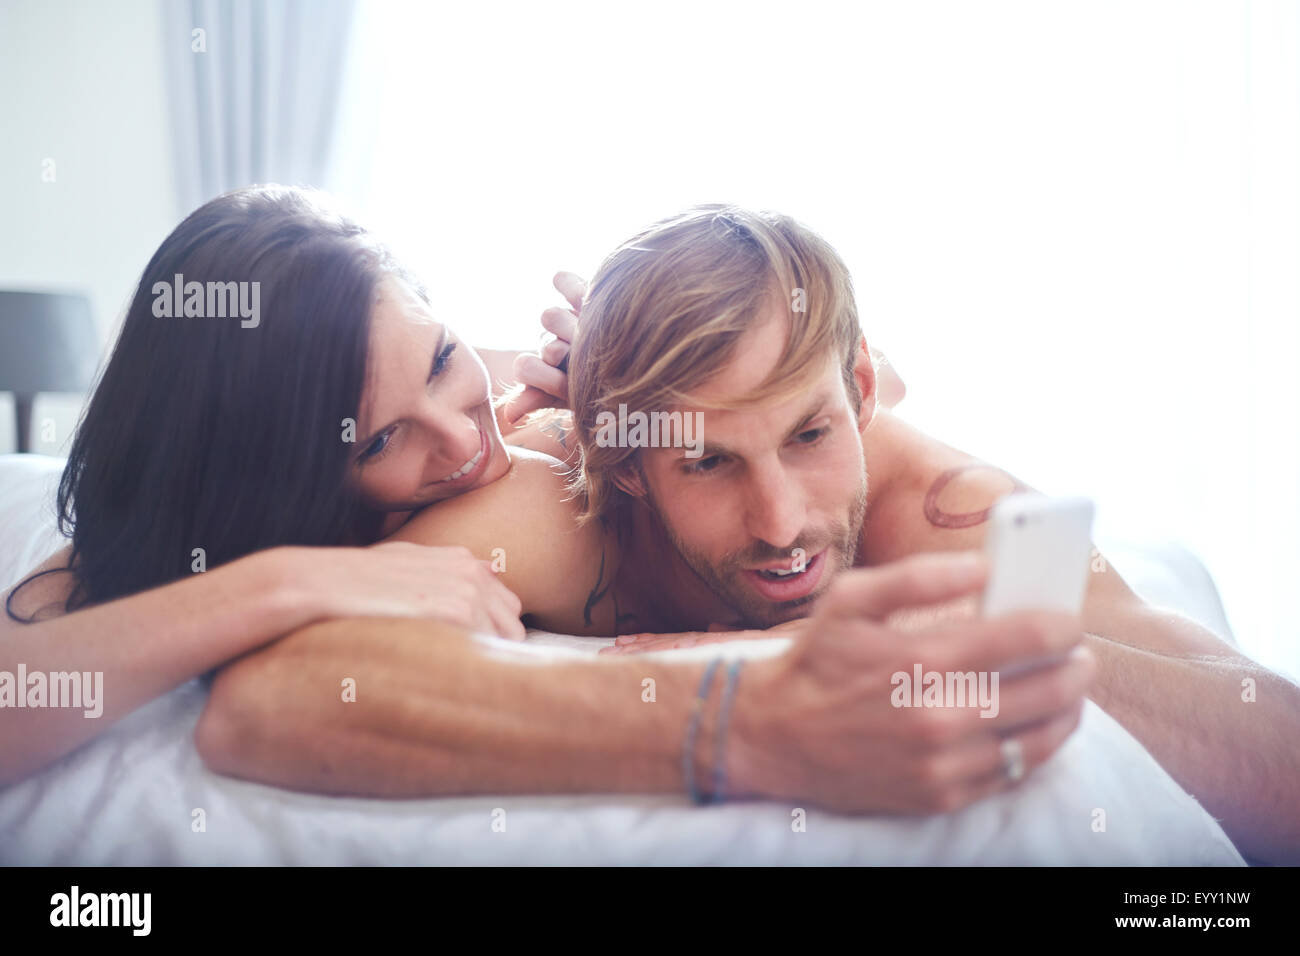 Couple relaxing on bed texting with cell phone Stock Photo